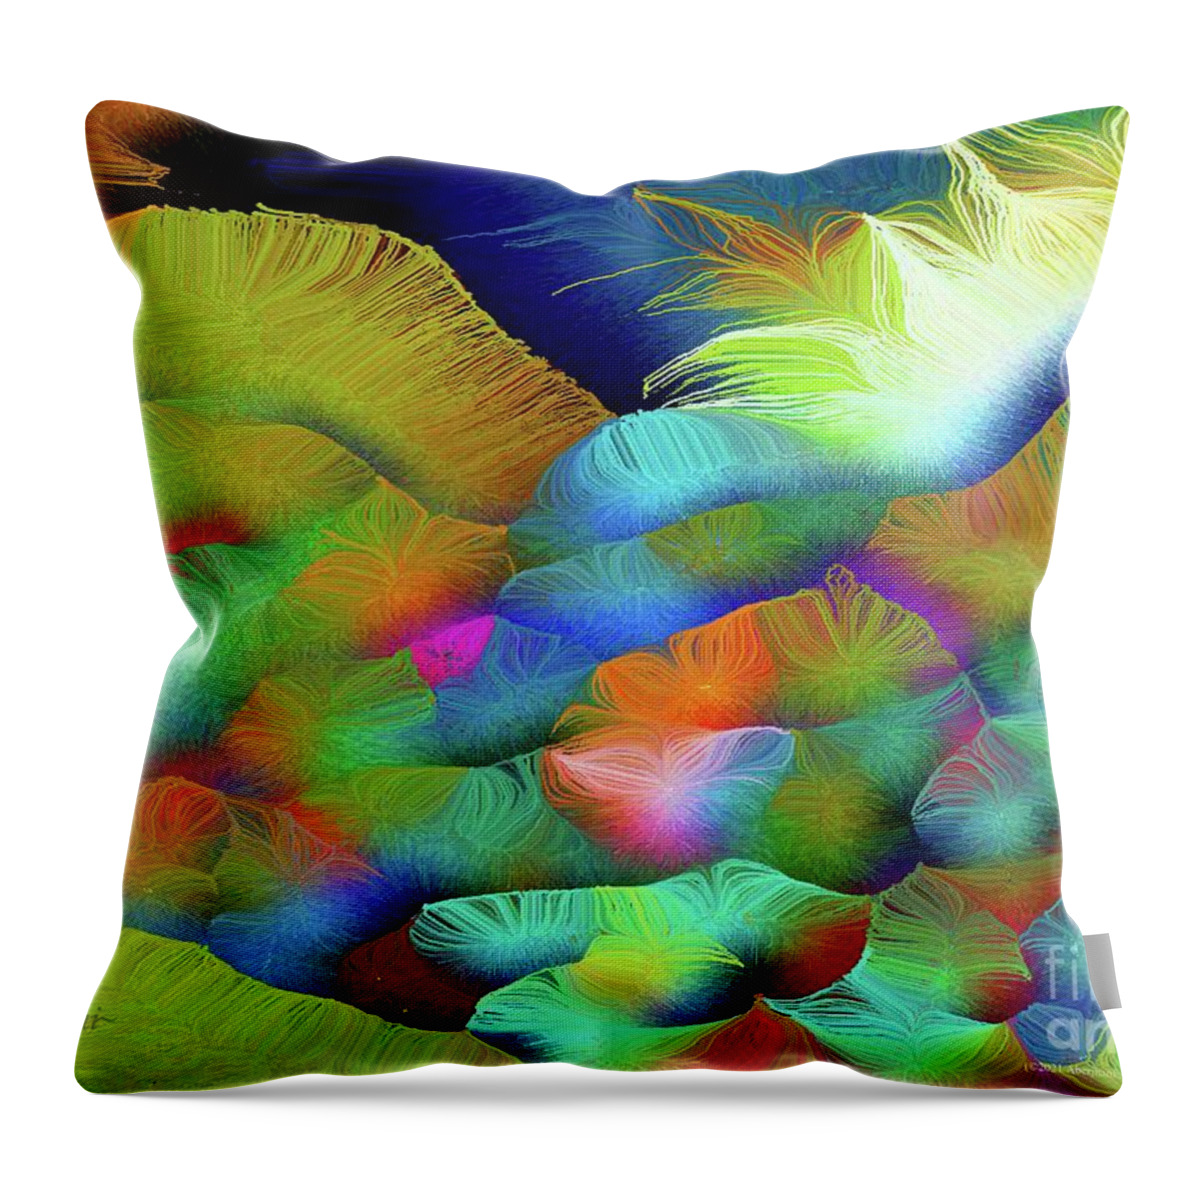 Silk-featherbrush Artstyle Throw Pillow featuring the painting Taking a Deep Breath between Rivers and Borders by Aberjhani